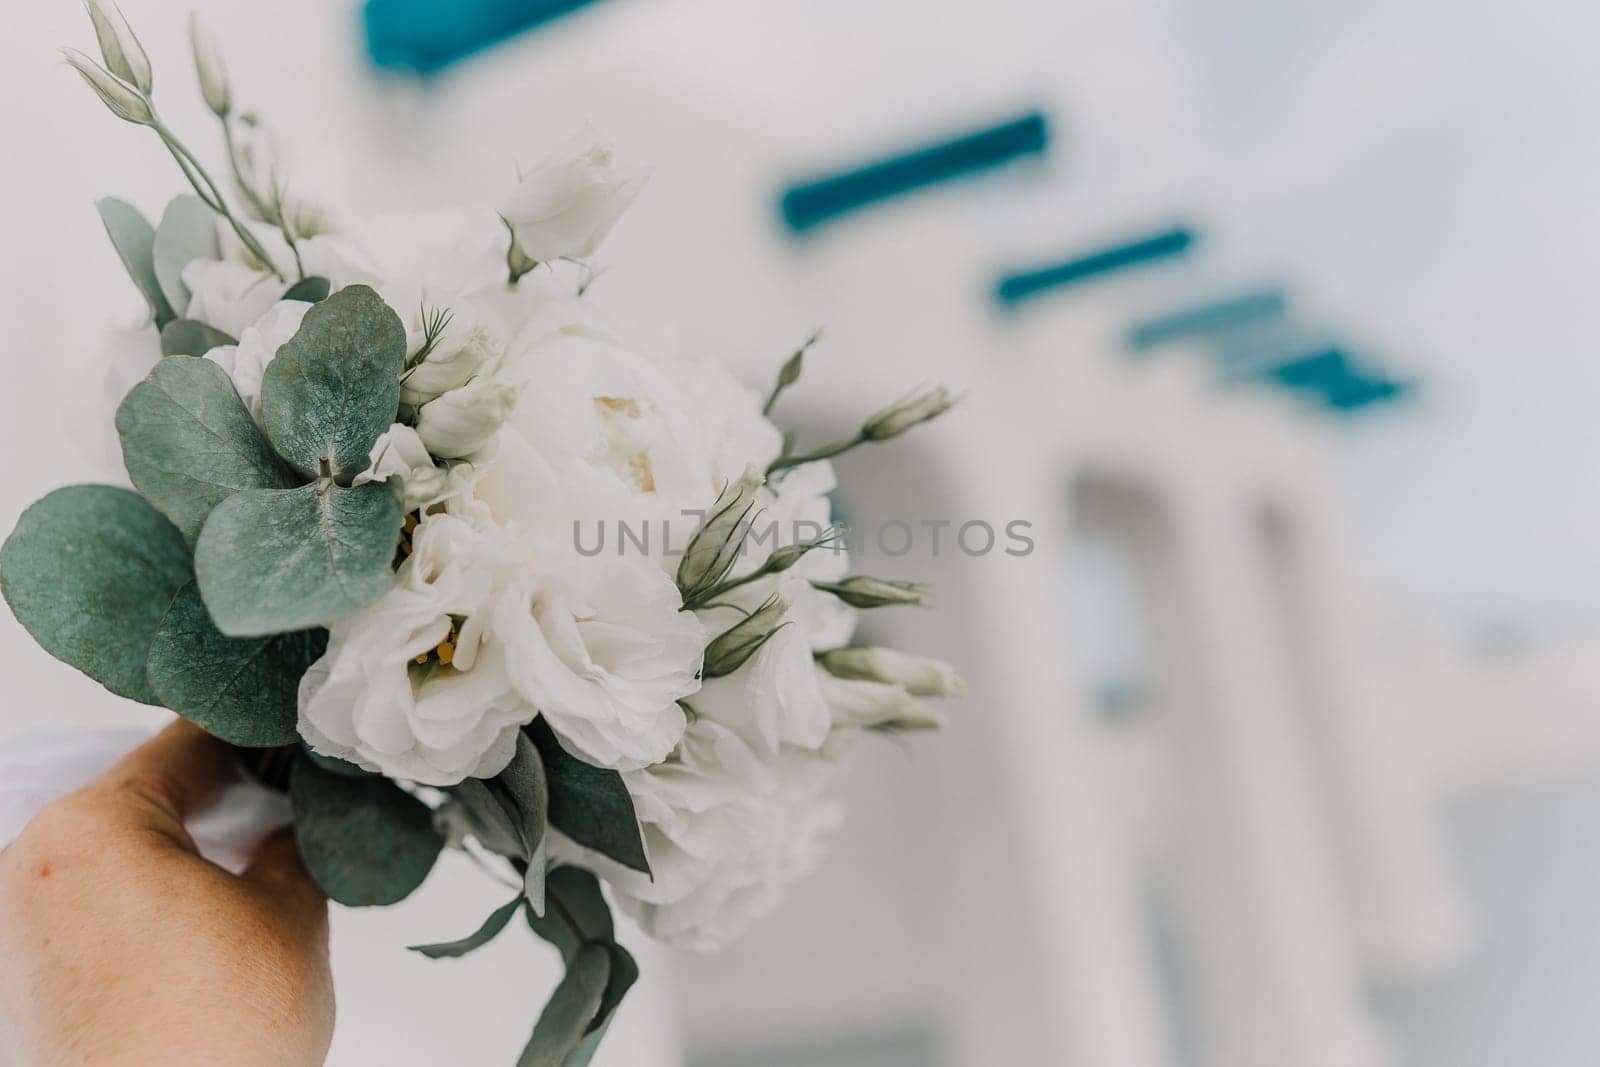 A bouquet of white flowers is being held by a person. The flowers are arranged in a way that they are not too close to each other, giving the impression of a beautiful and elegant arrangement